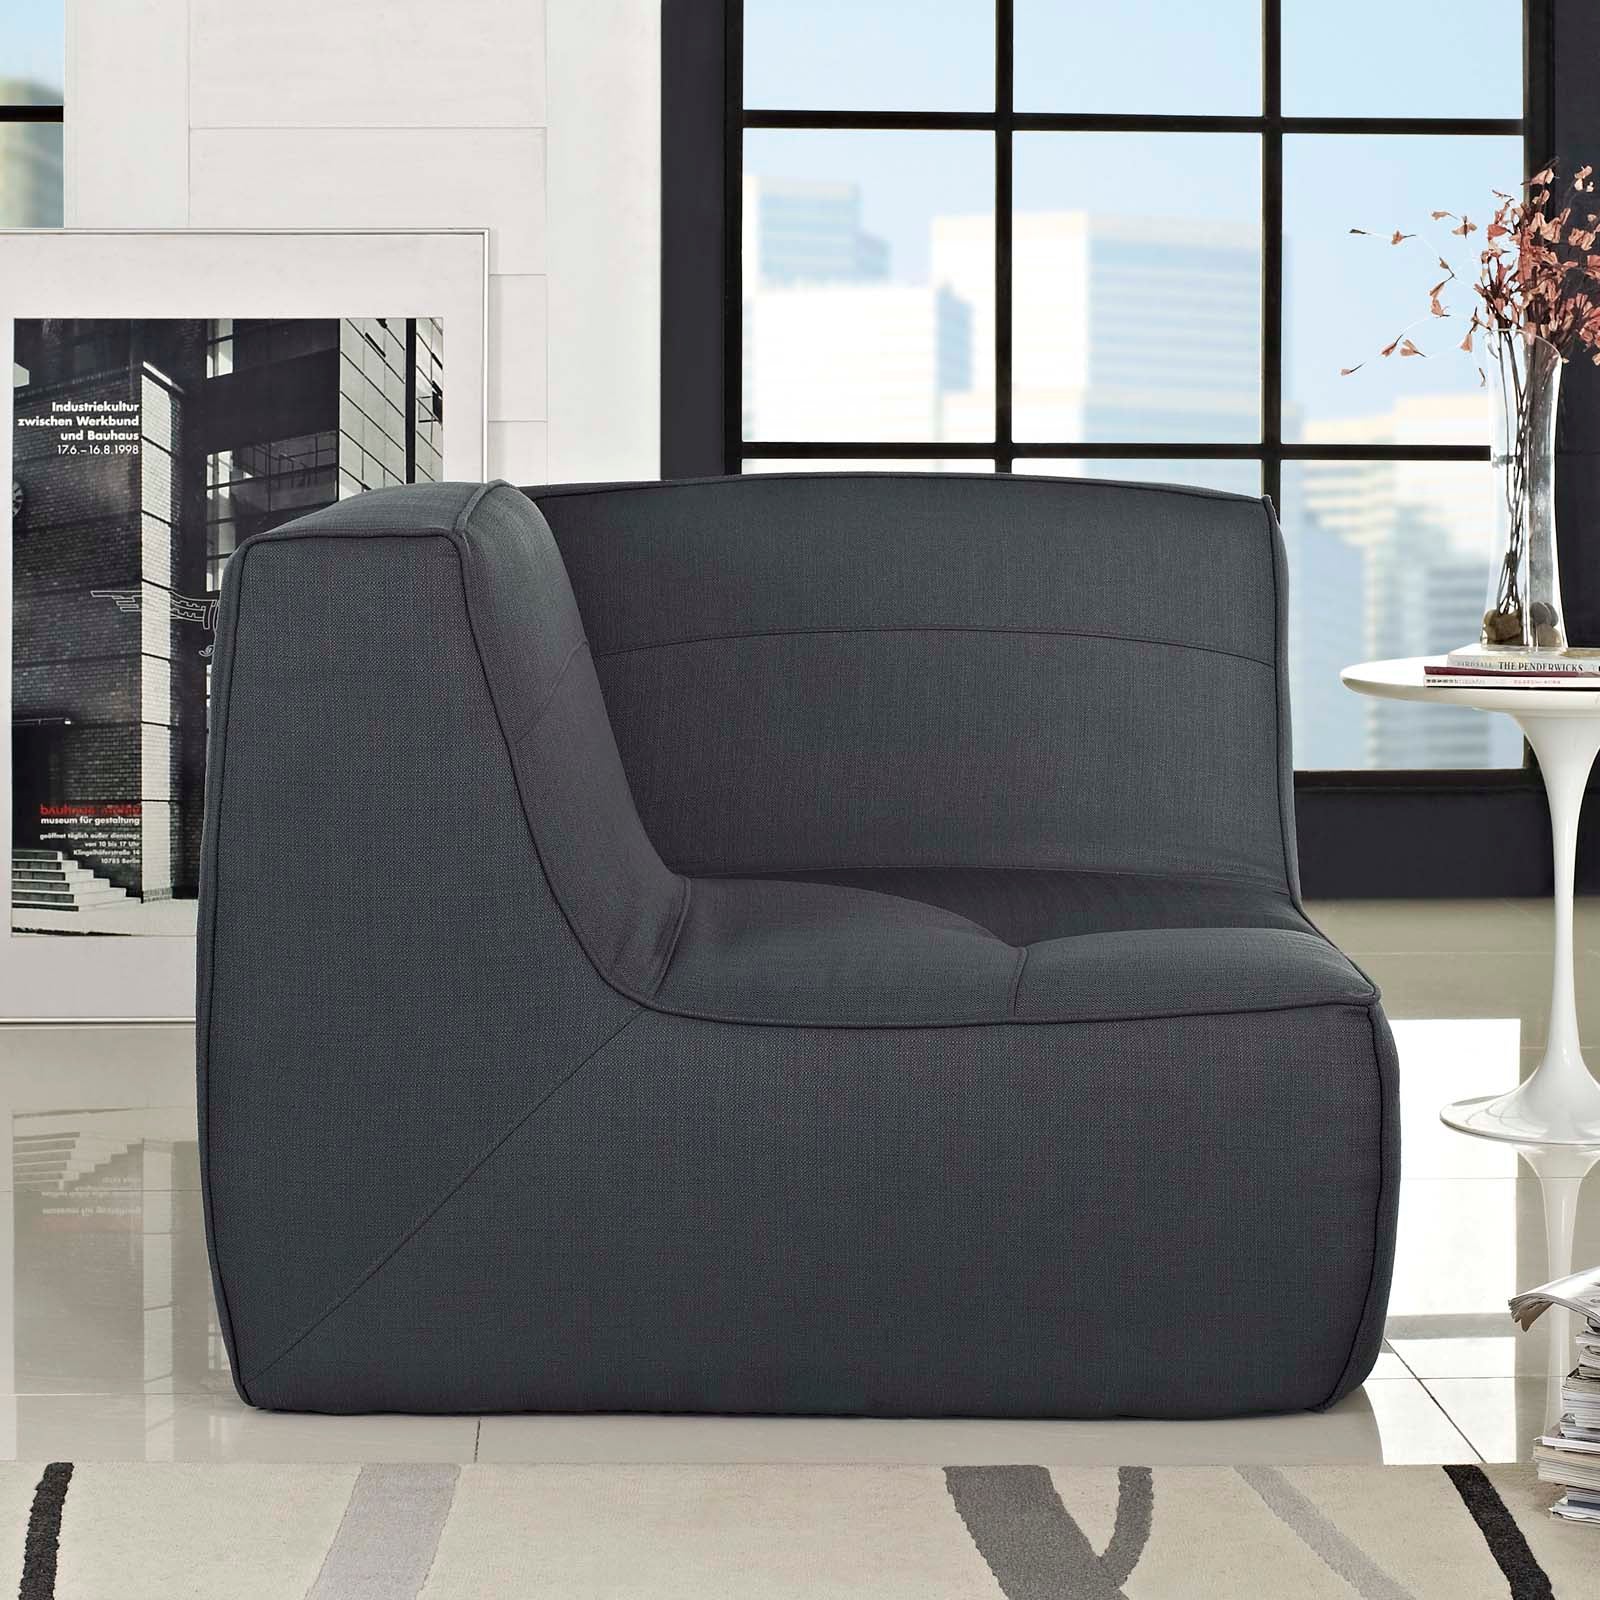 Modway Accent Chairs - Align Upholstered Fabric Corner Sofa Charcoal